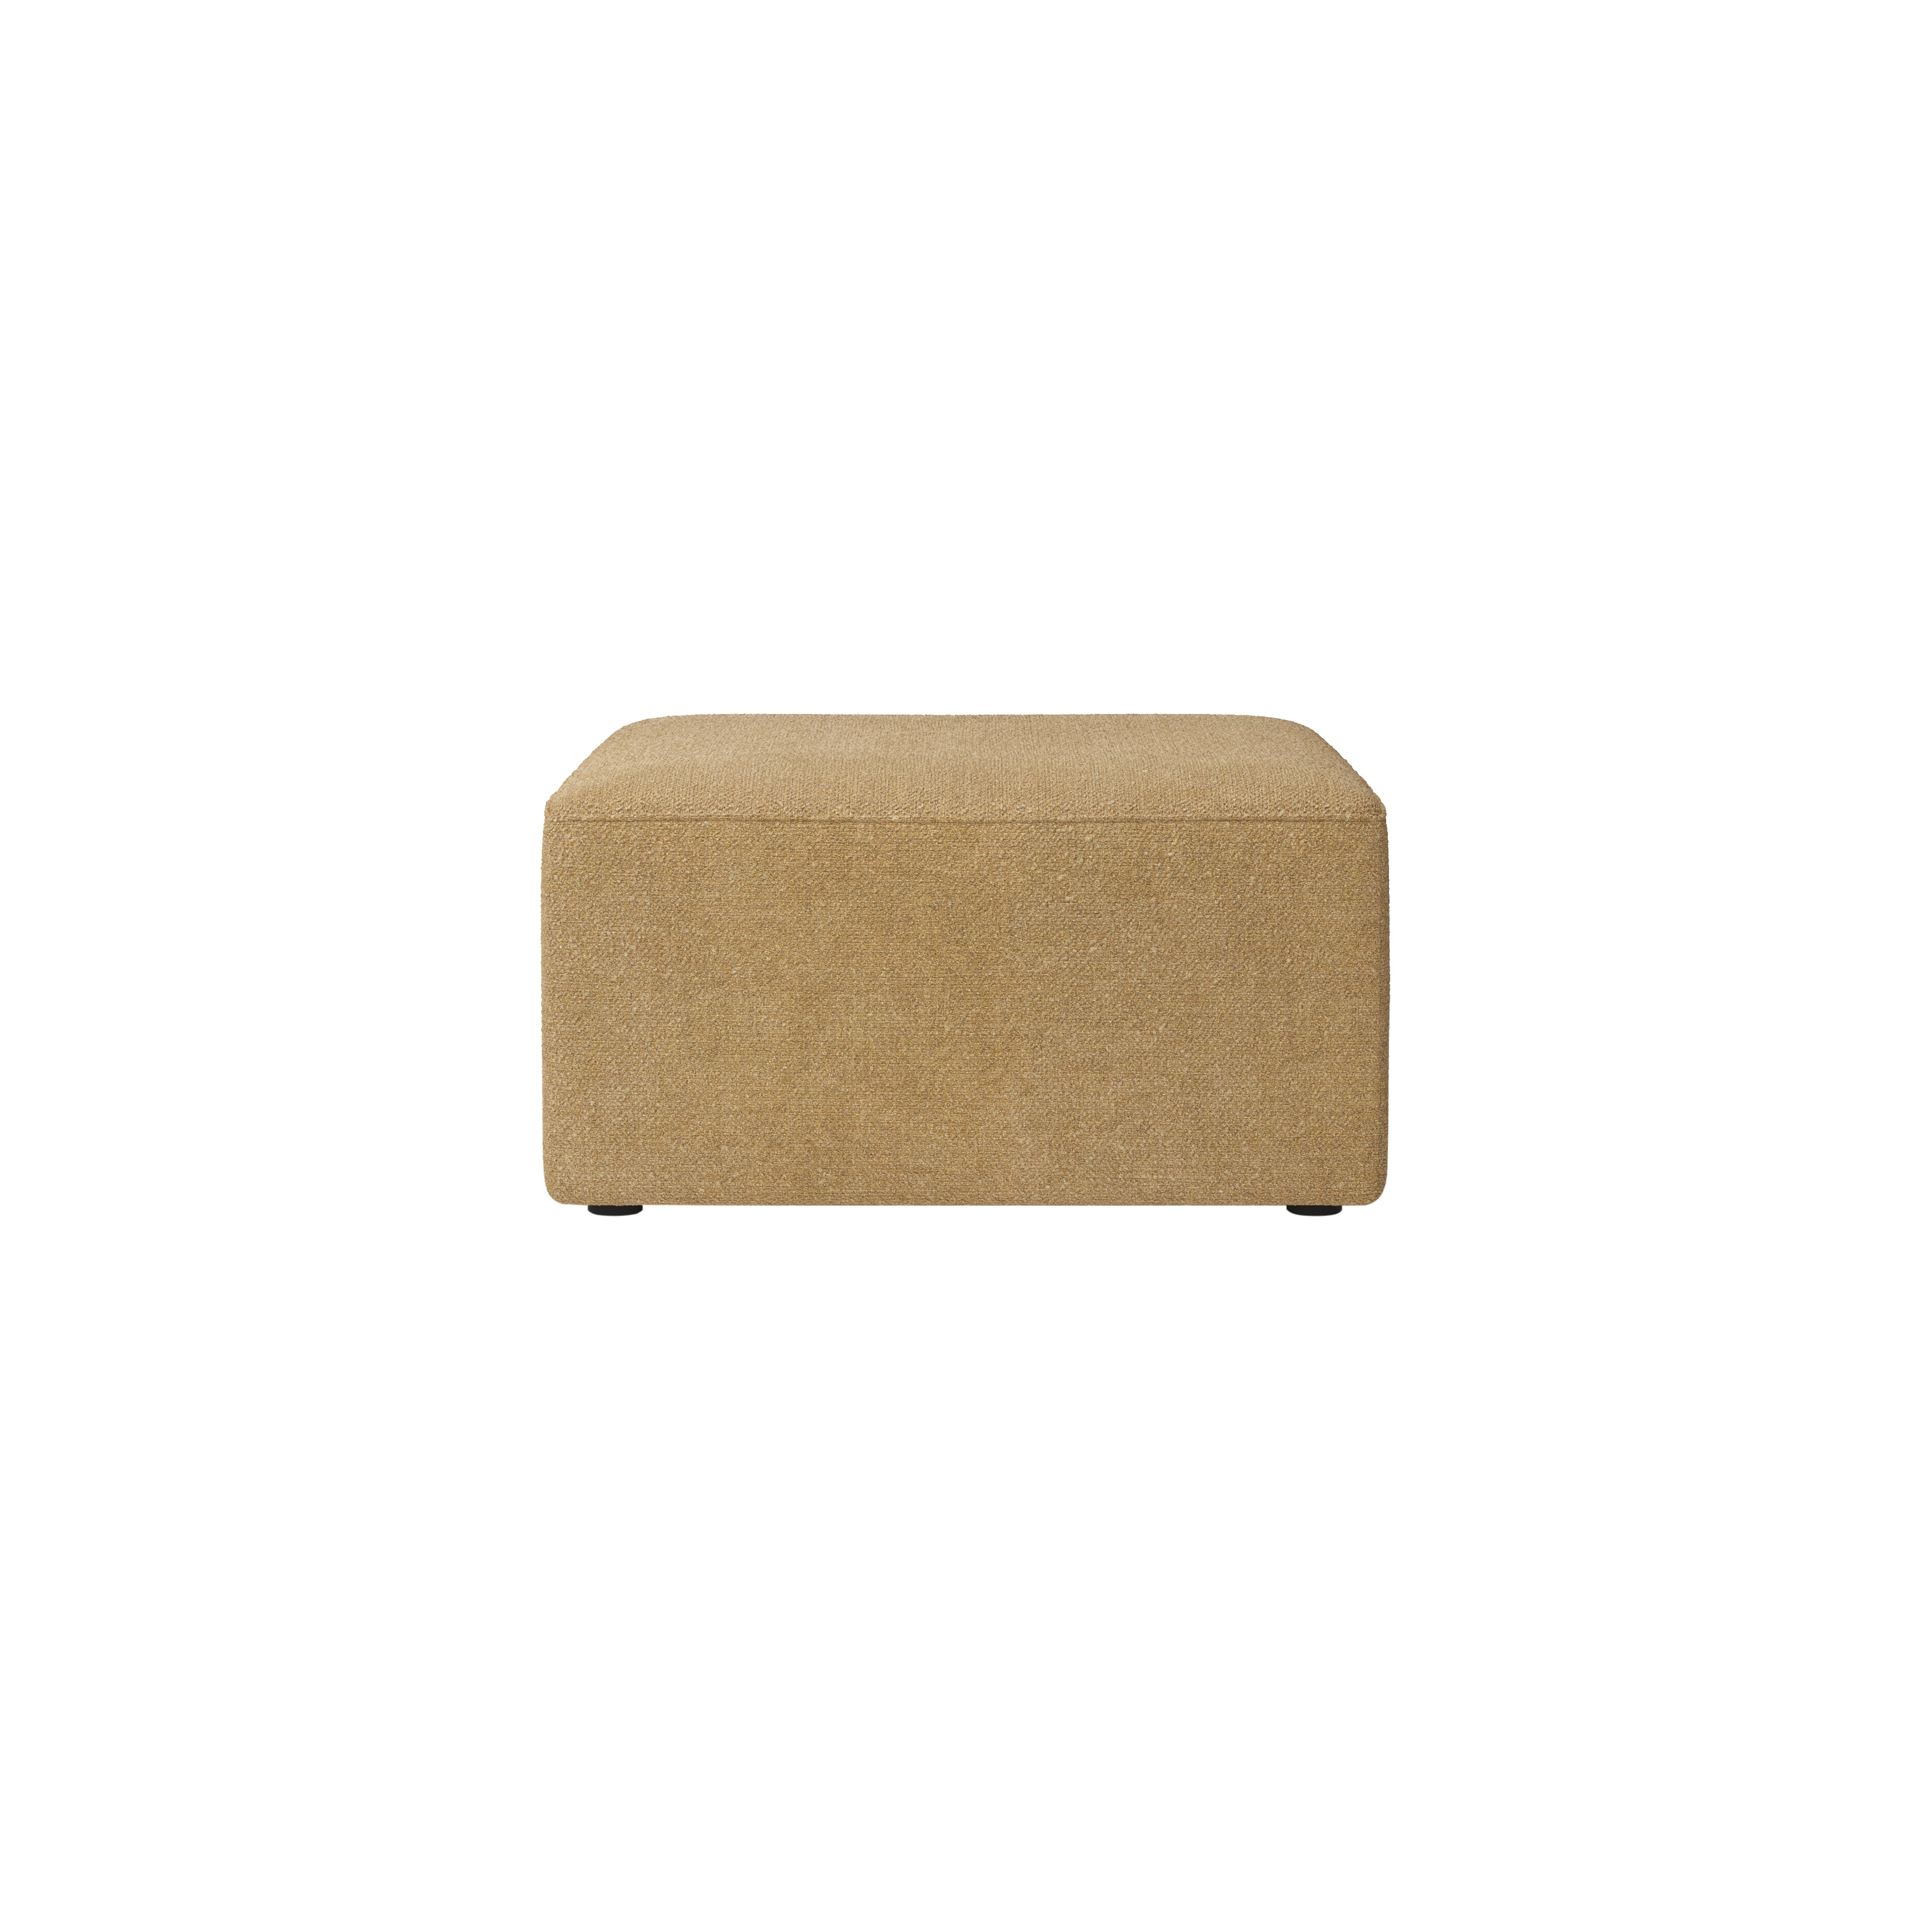 Eave Pouf: Small - 29.5